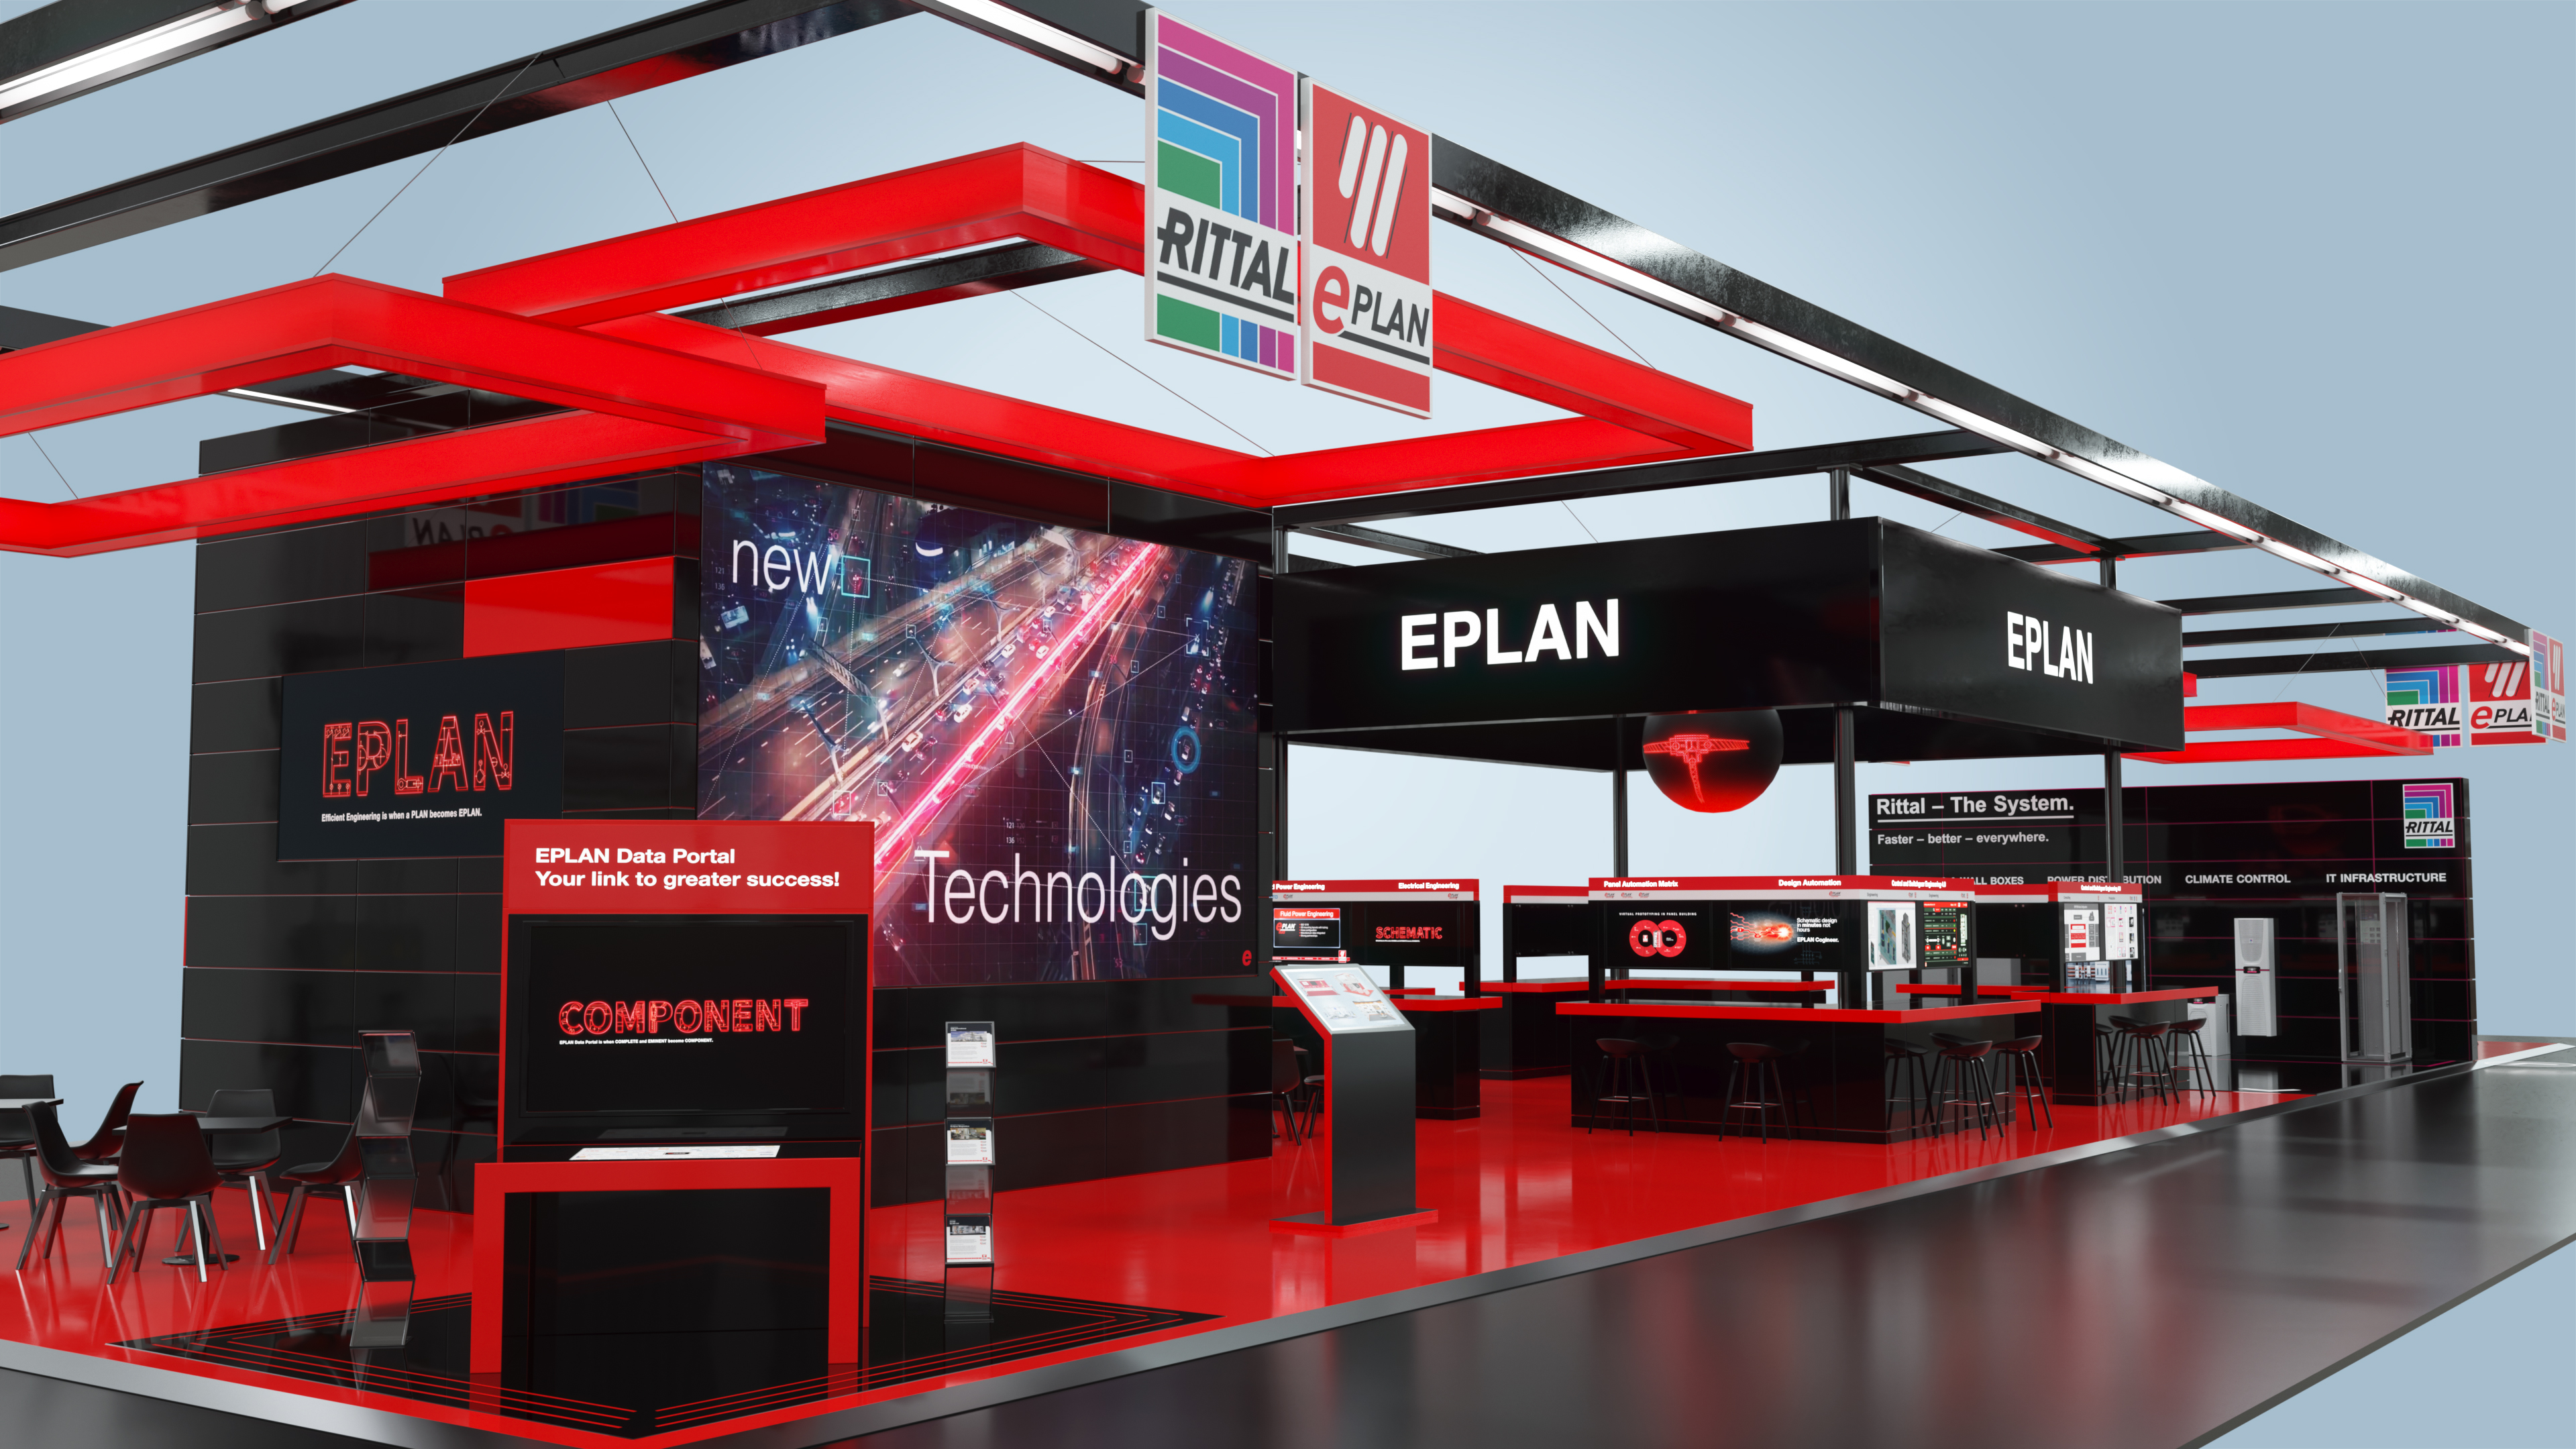 EPLAN has unveiled a new virtual exhibition stand, which is hosted at IndustryExpo – the world’s first truly virtual exhibition.